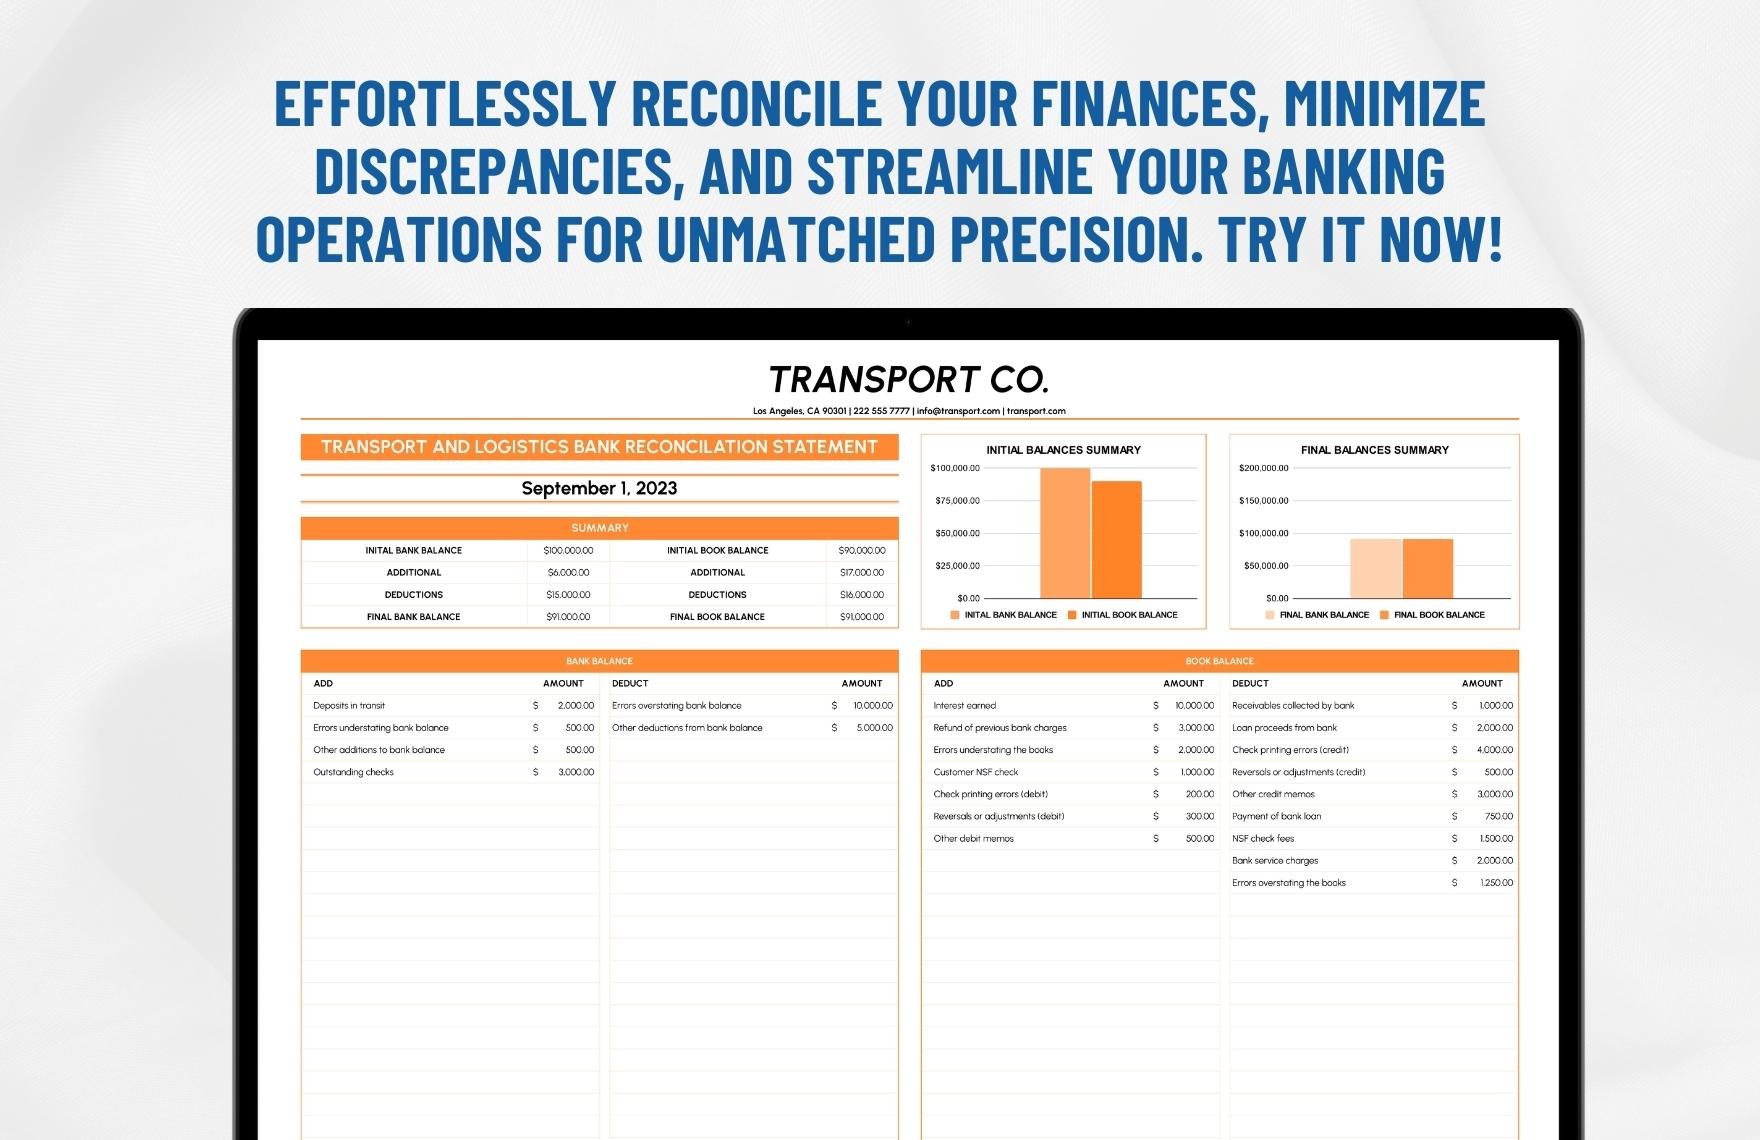 Transport and Logistics Bank Reconciliation Statement Template